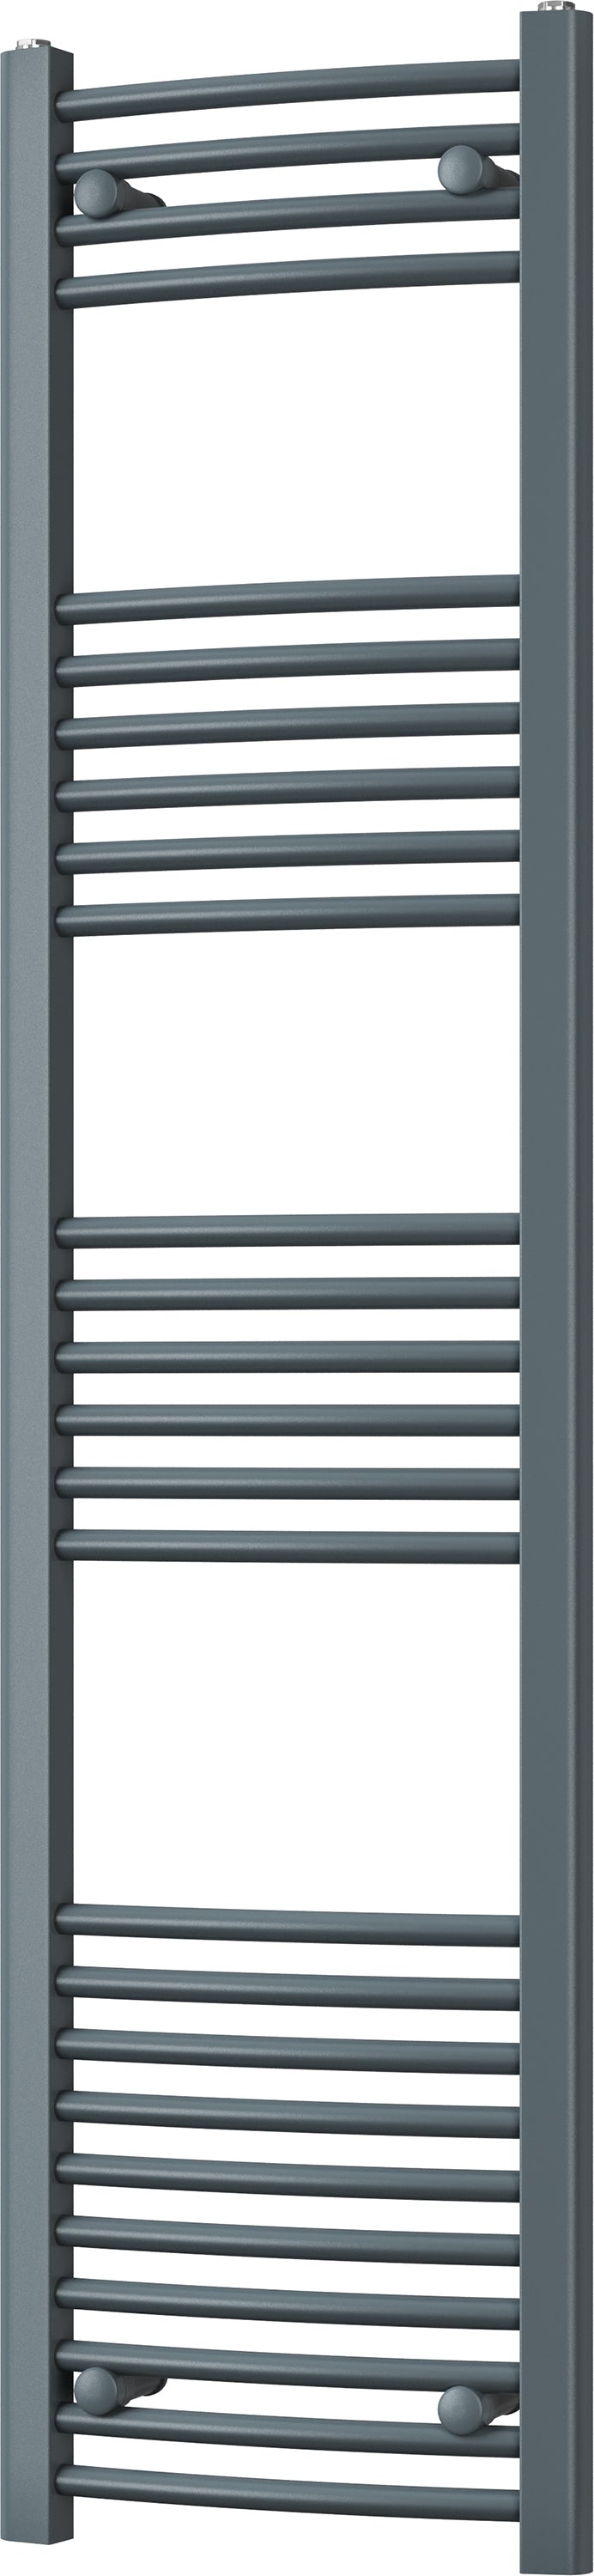 Zennor - Anthracite Heated Towel Rail - H1600mm x W400mm - Curved